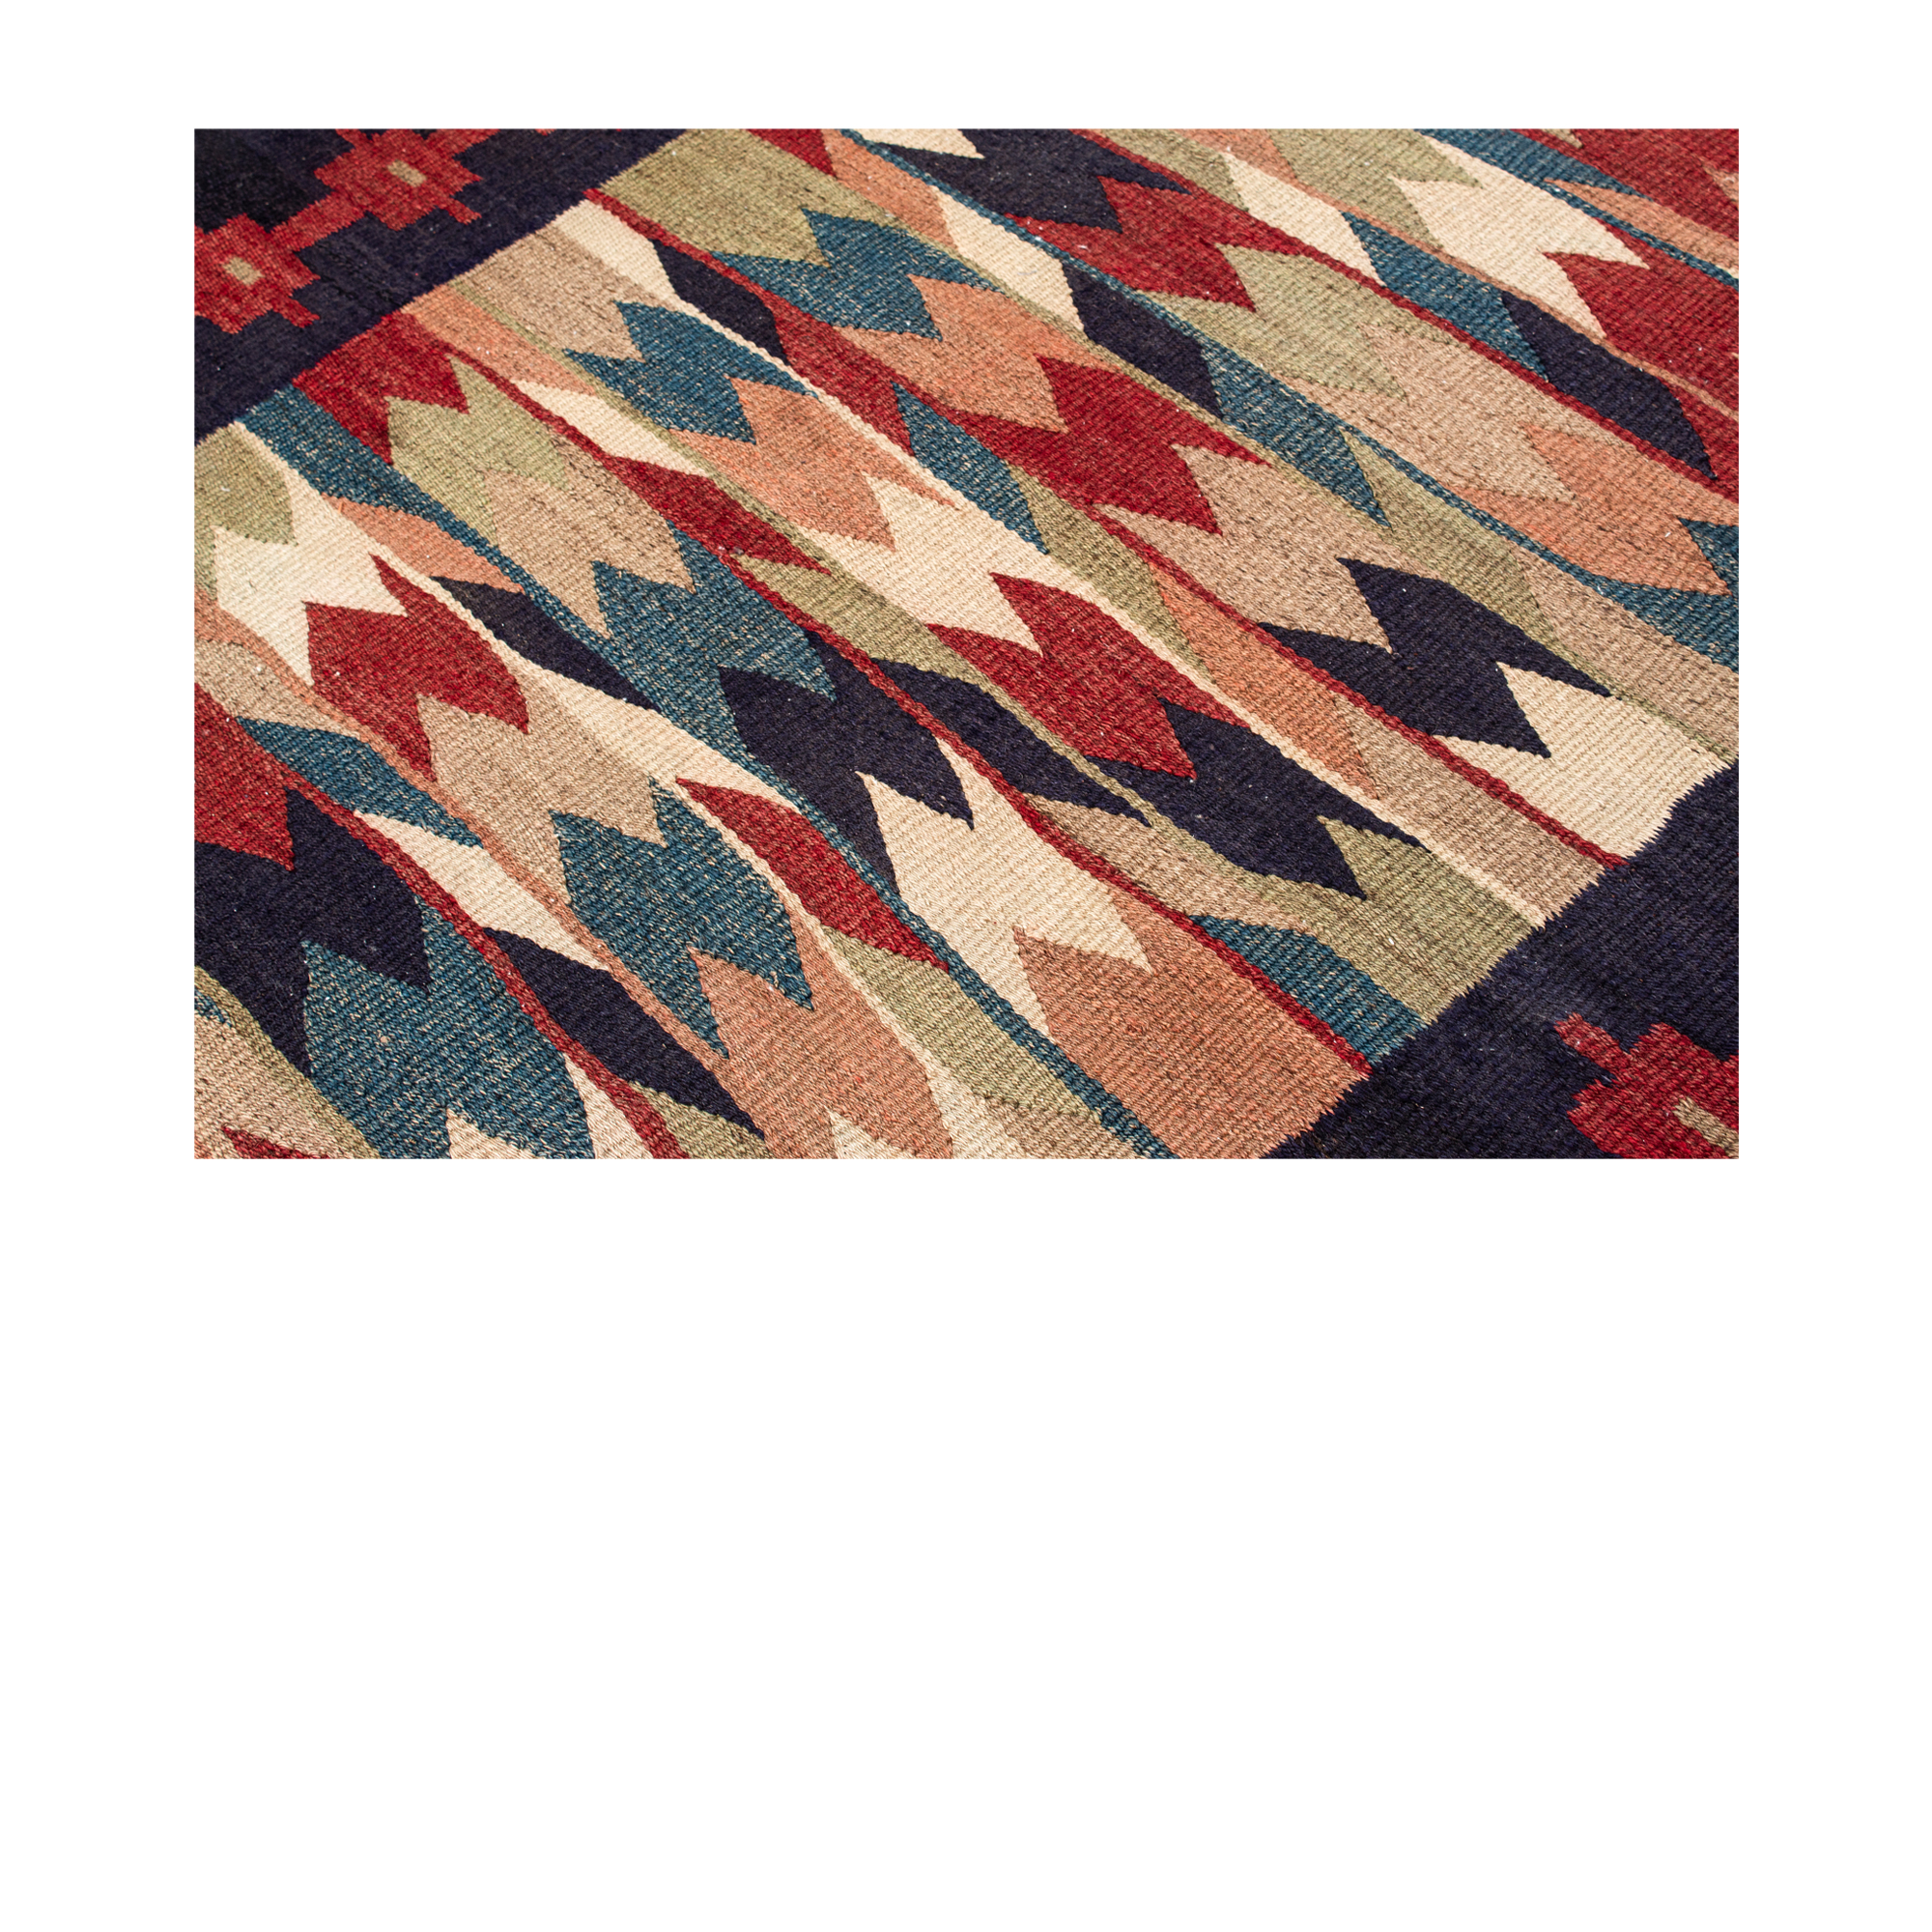 This Kalach rug is hand-knotted and made of 100% wool. 